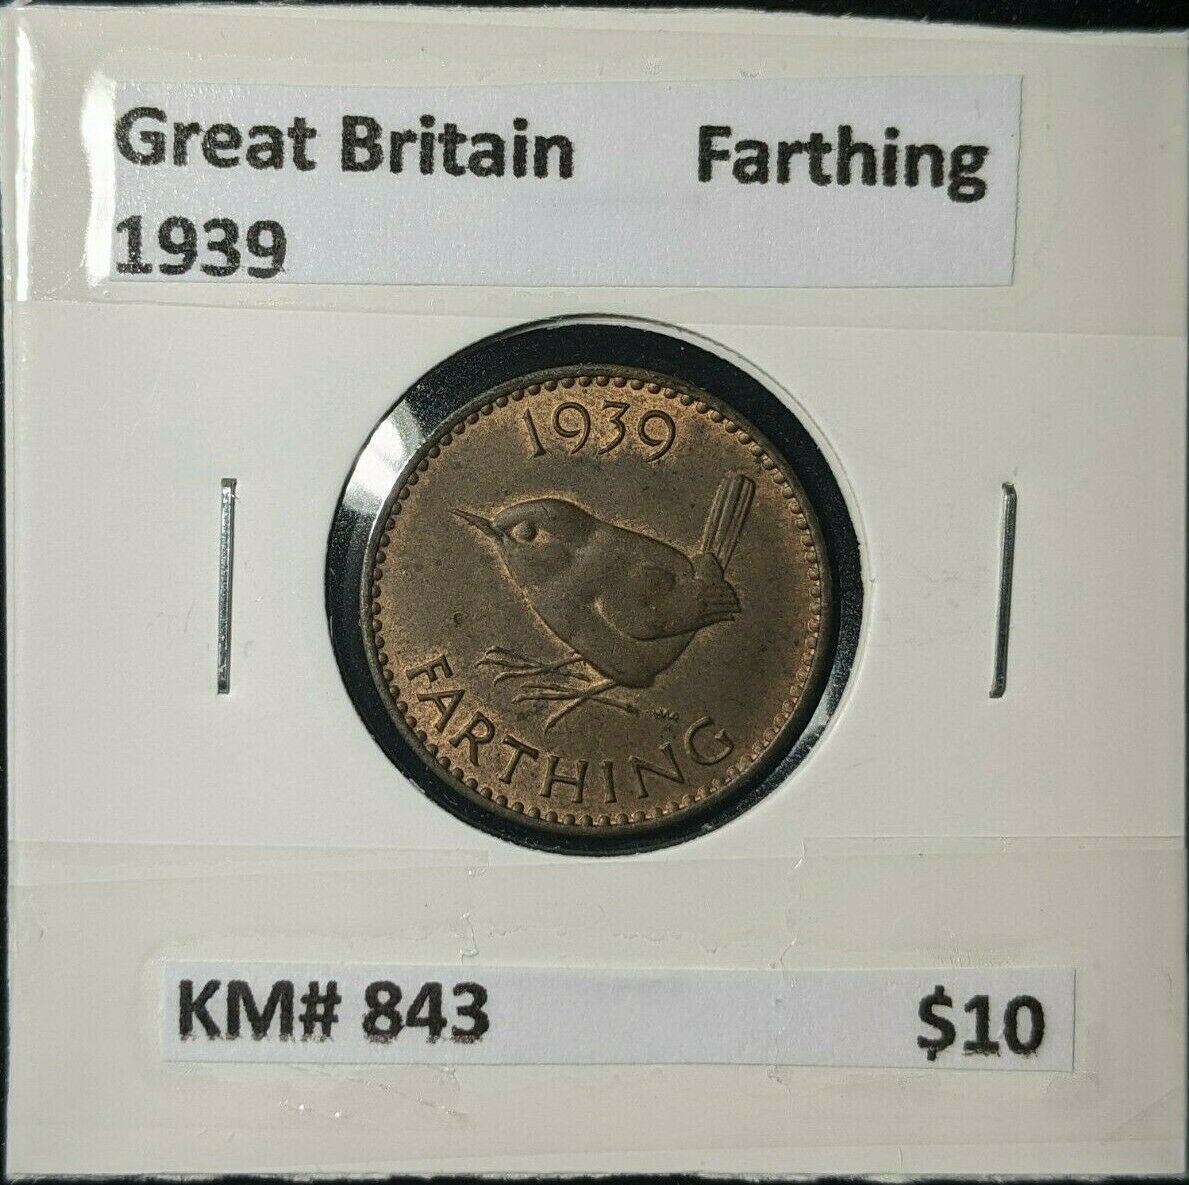 Great Britain 1939 1/4d Farthing KM# 843 #023